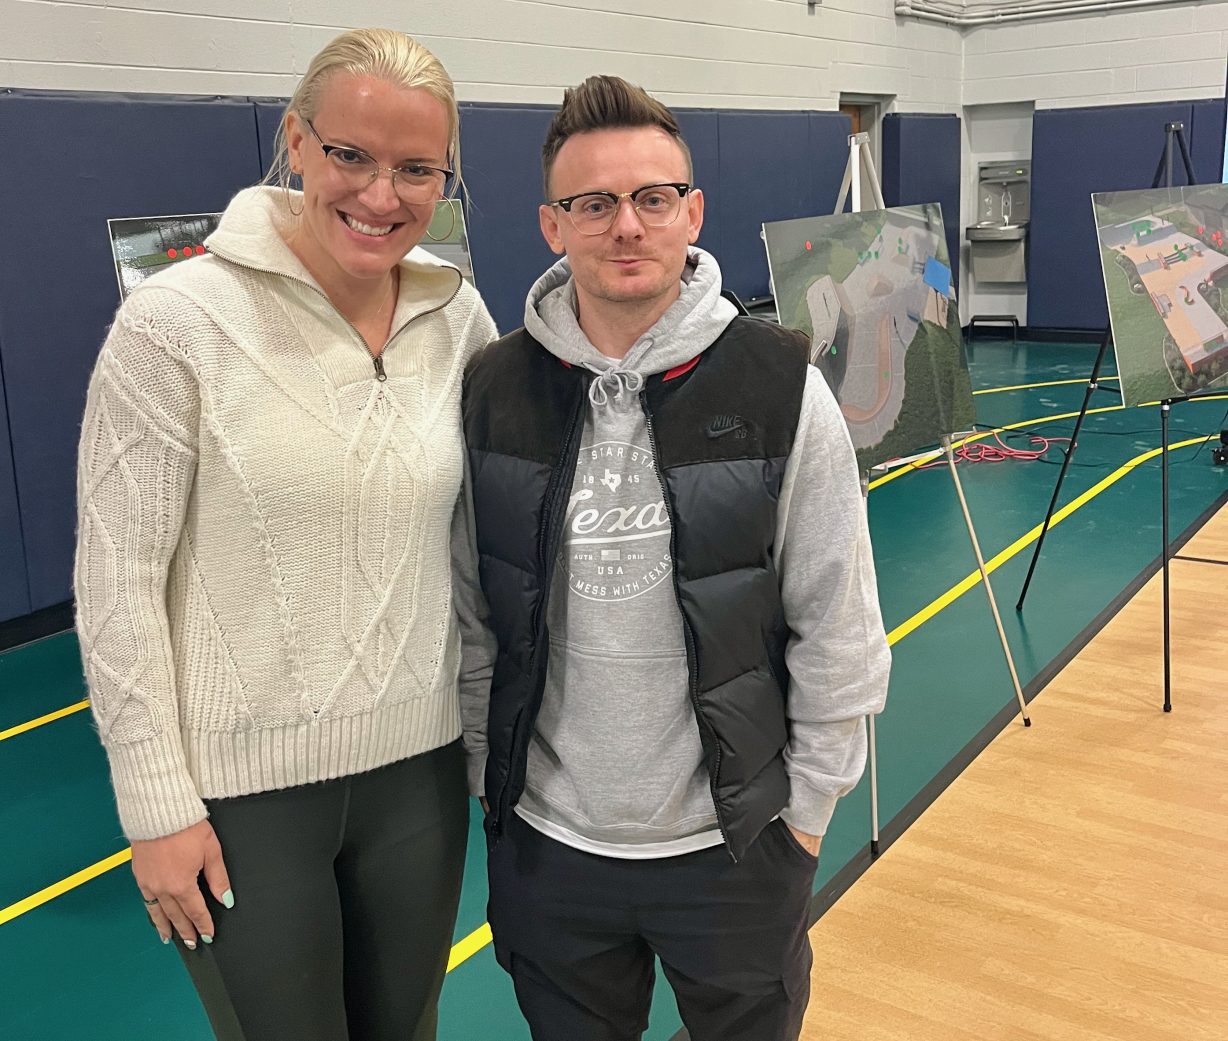 Two people pose for the camera with renderings of skate park designs in the background